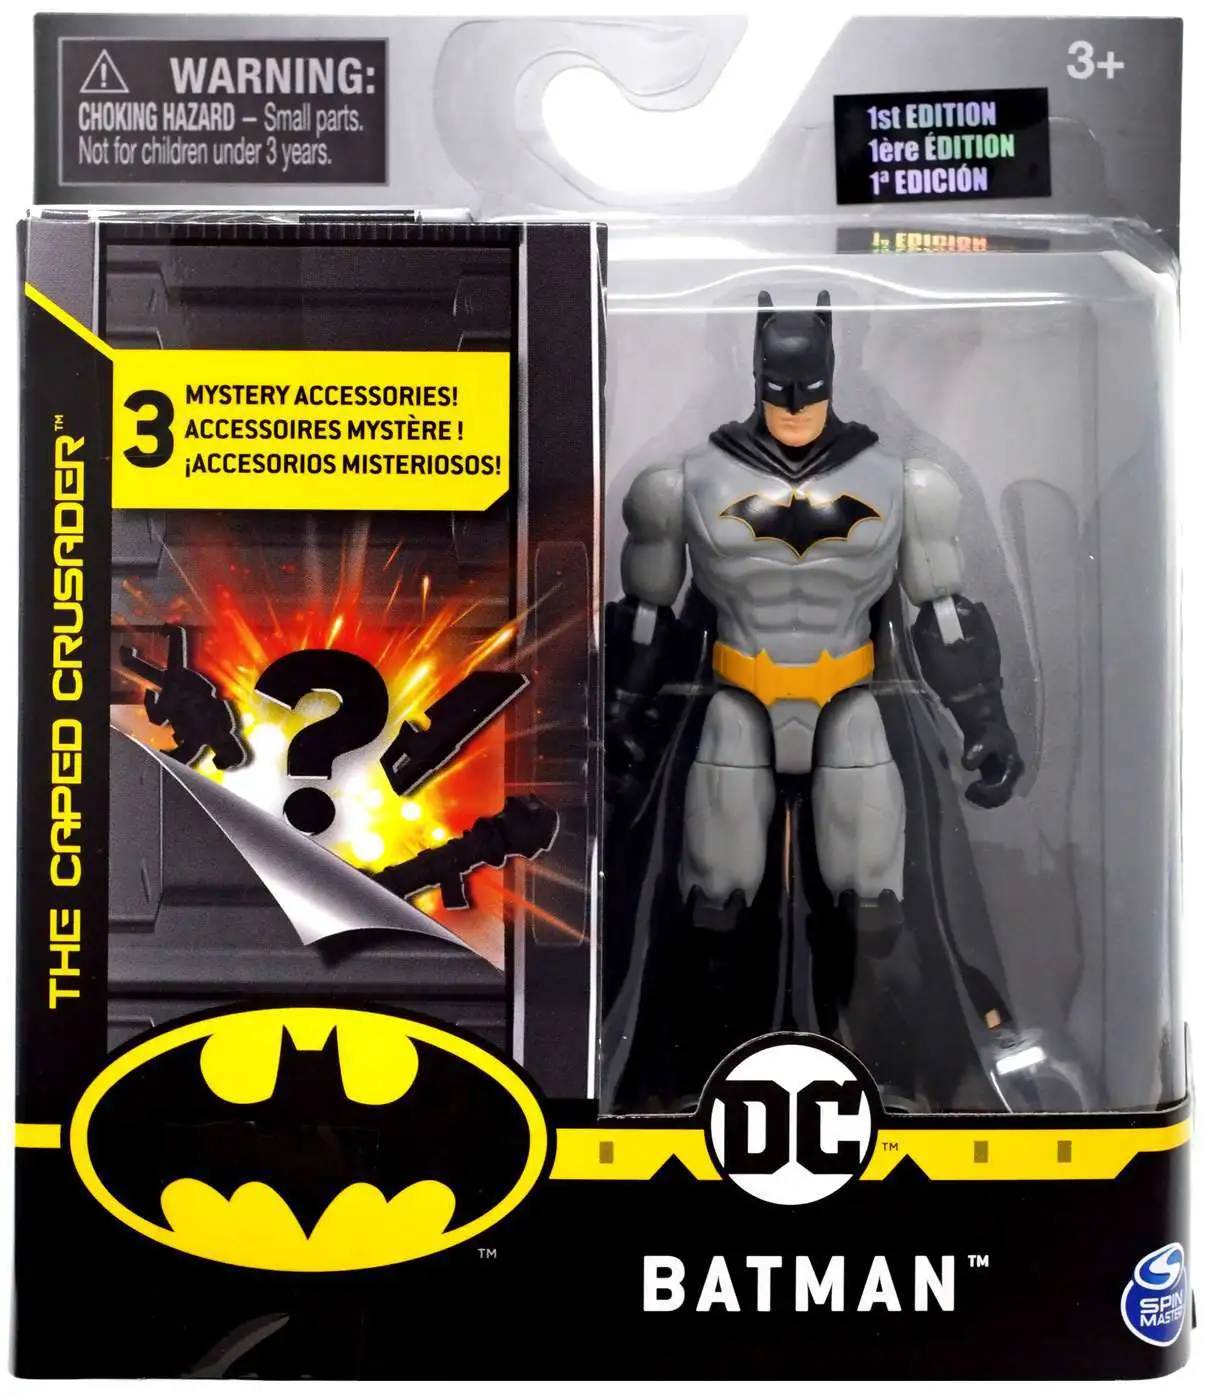 2020 DC Batwoman 4" Figure Spin Master Batman Caped Crusader 1st Edition for sale online 